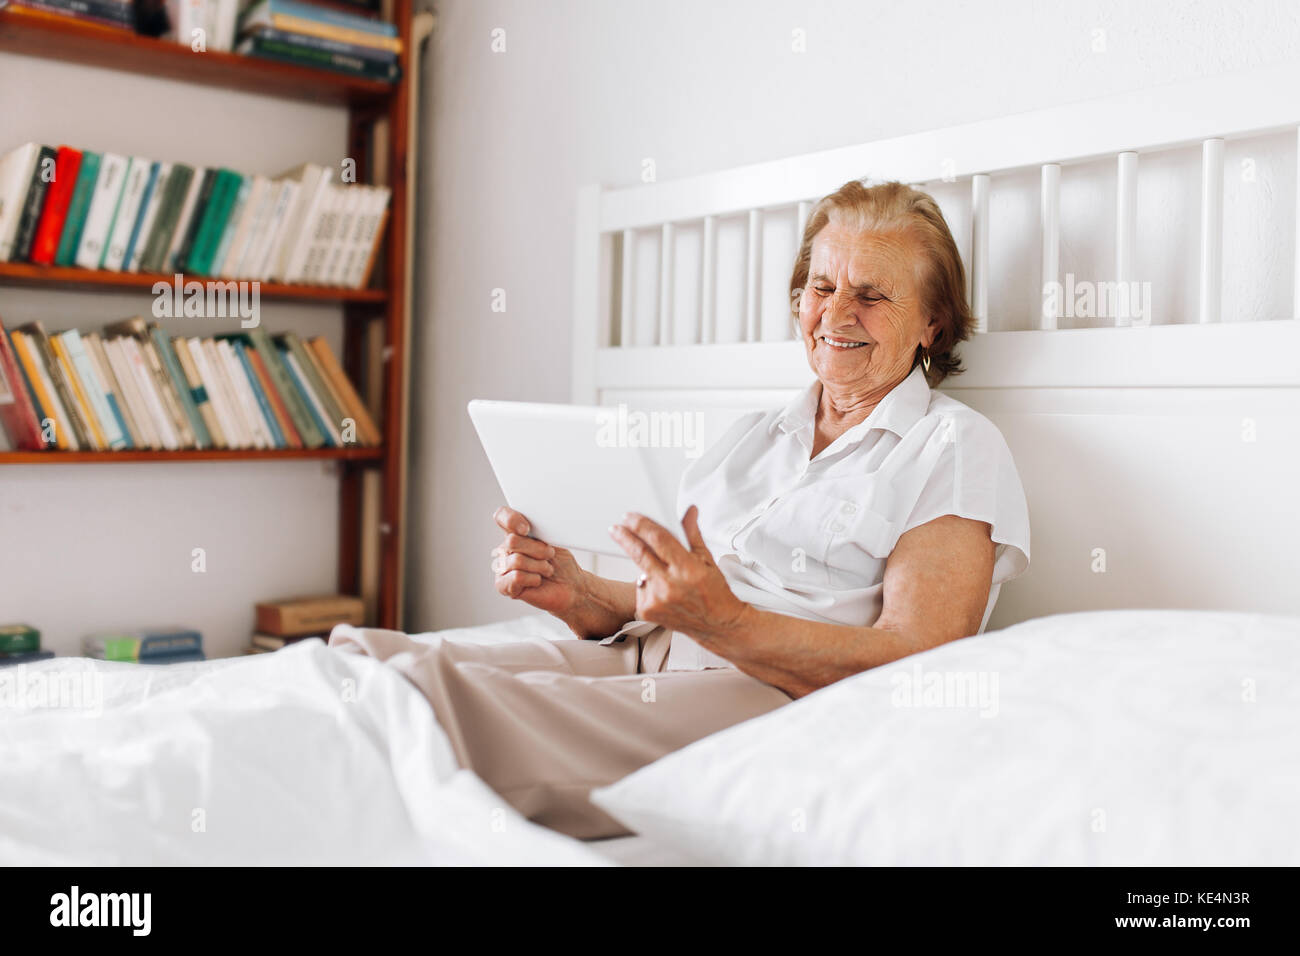 Elderly woman sitting comfortably on bed and using her digital tablet Stock Photo